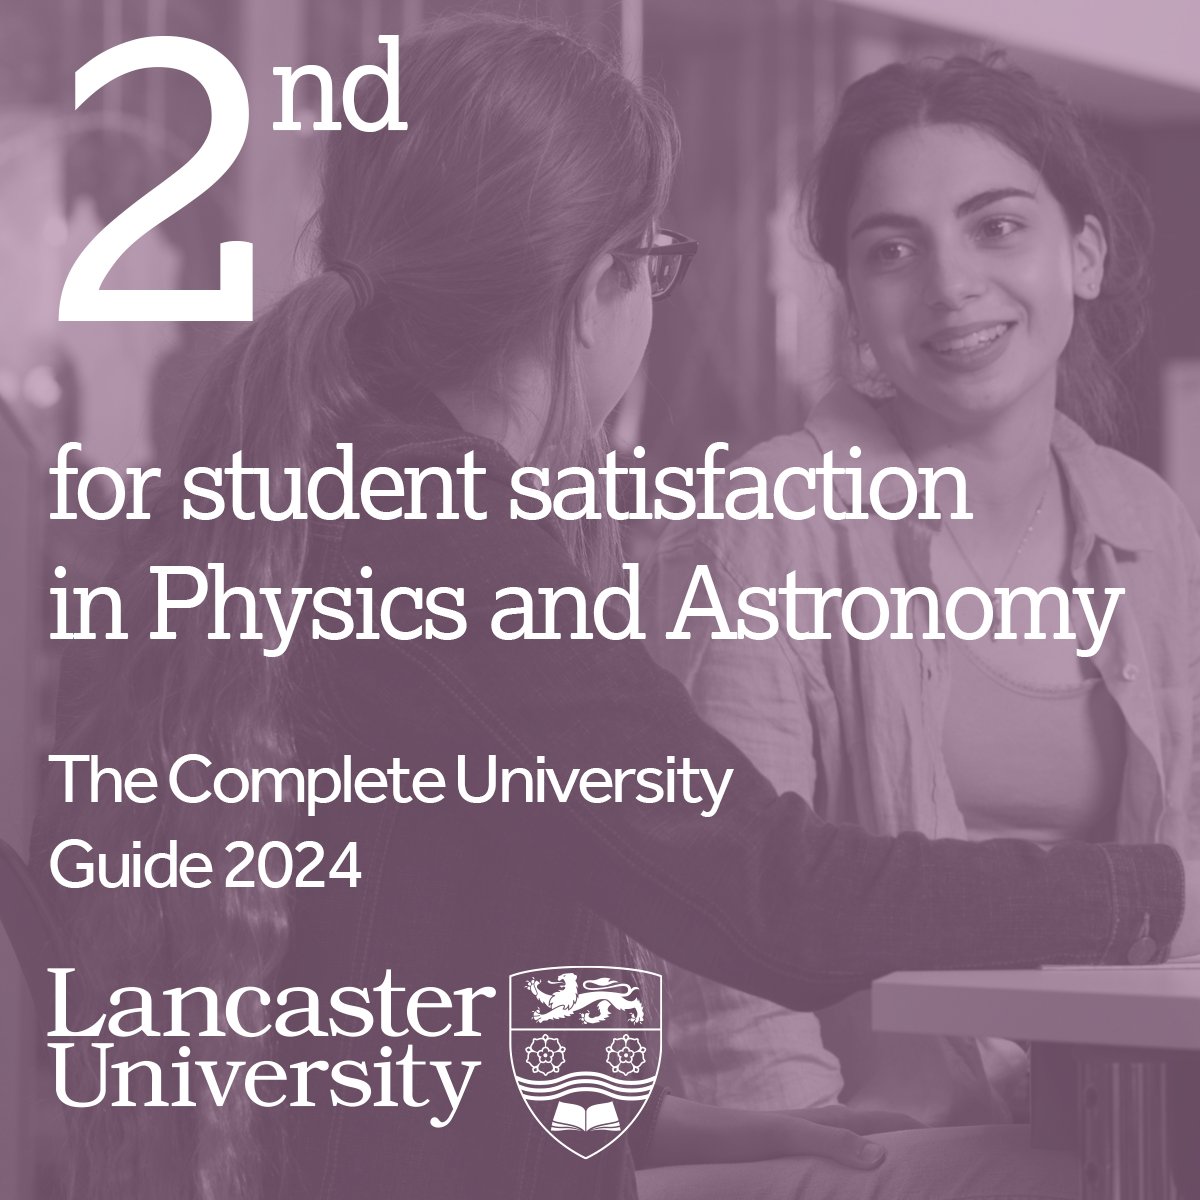 We're still so thrilled by our #2 ranking in STUDENT SATISFACTION in the 2024 Complete University Guide league tables😍 Want to know what all the fuss is about? Join us for Open Day on the 1st and 15th July! Register on our website🪐